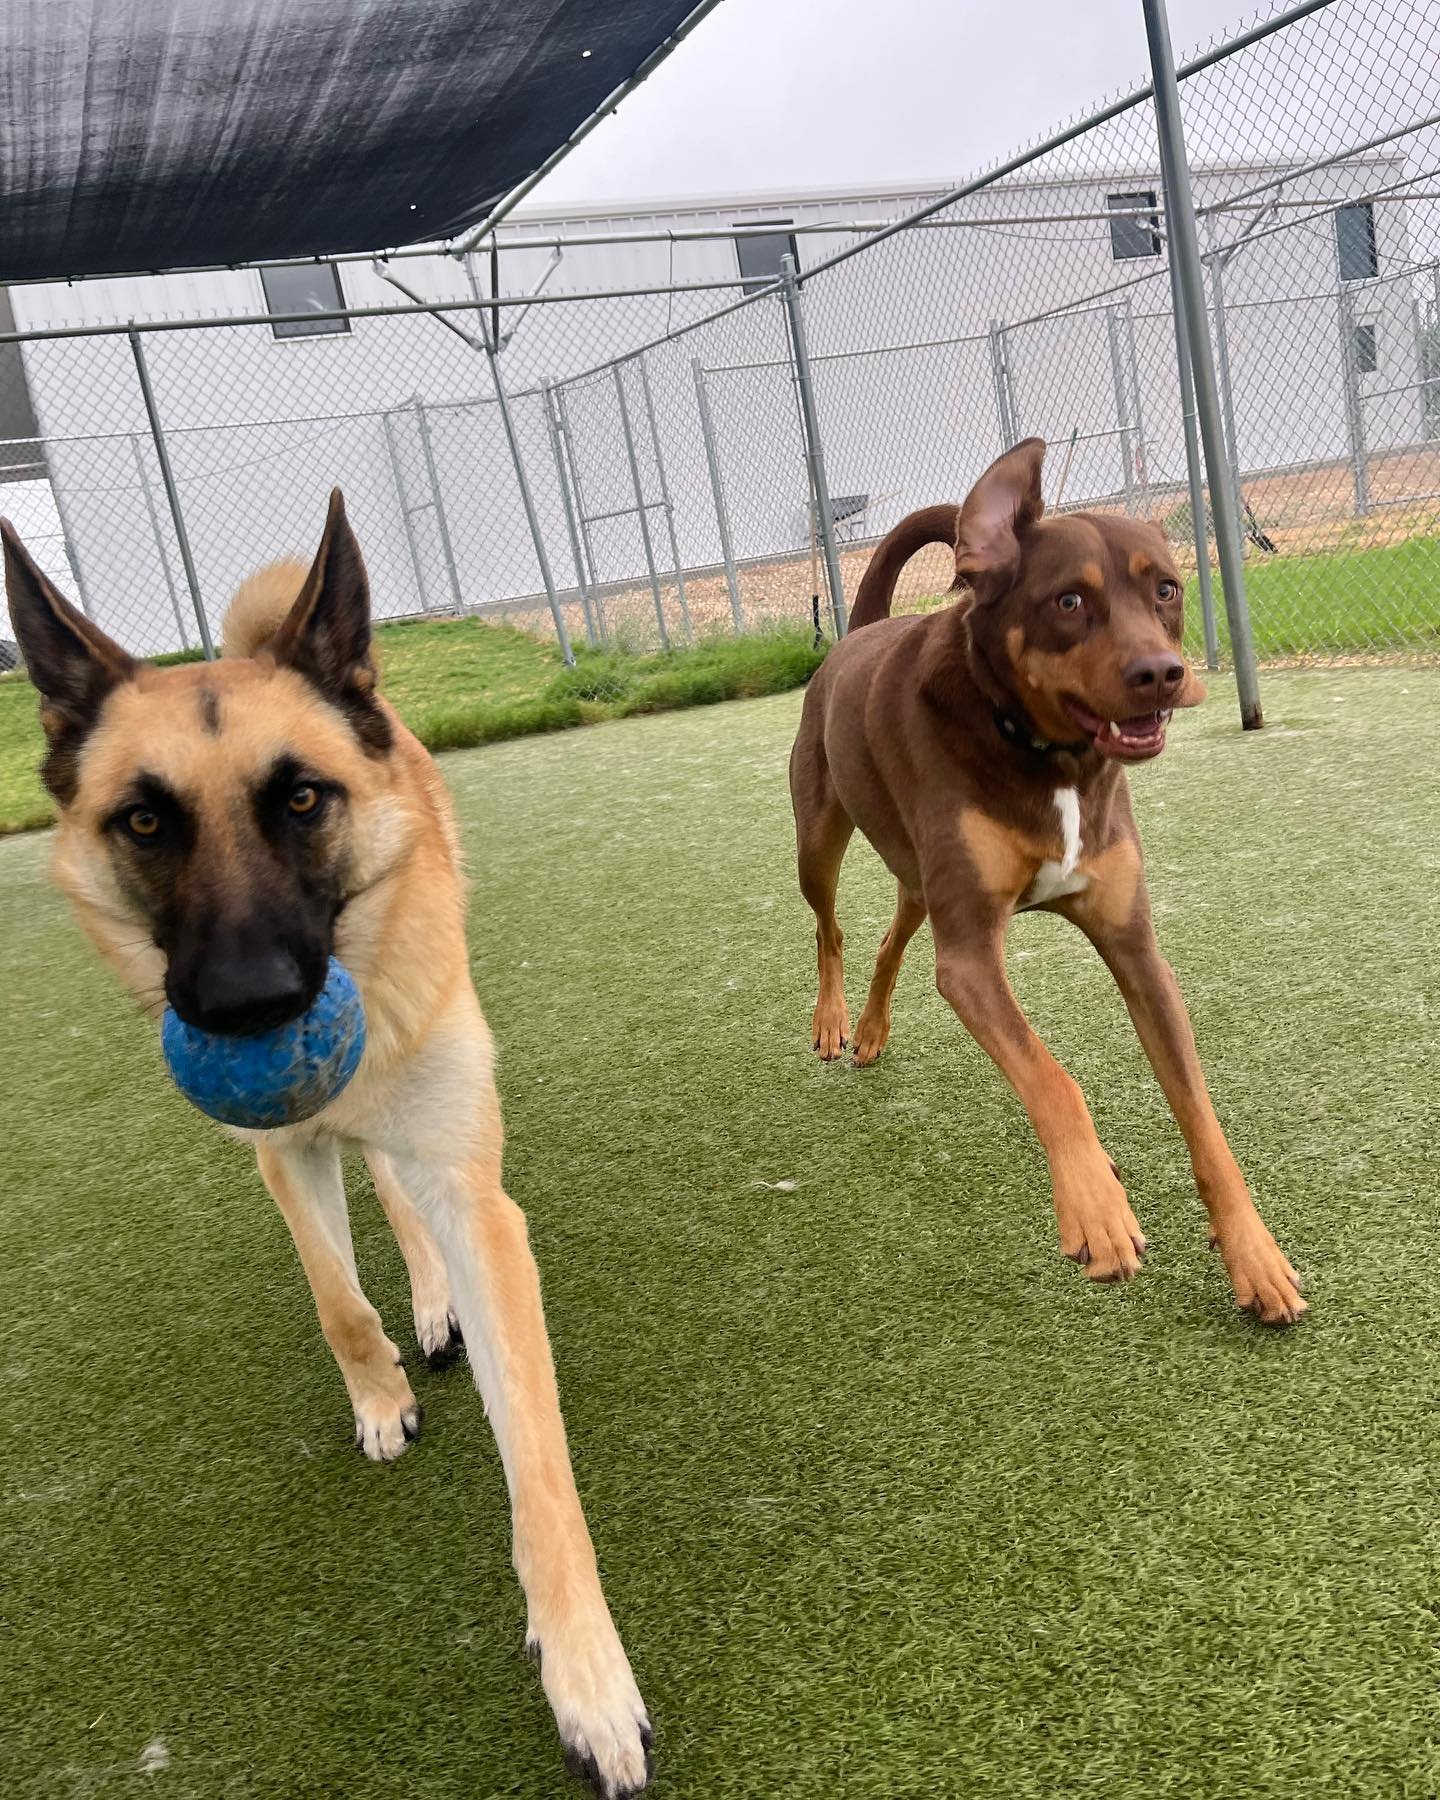 Cloudy days are our favorite days ⛅️ Enjoying the weather today is: Alfred &amp; Brubeck, MooMoo &amp; Woodford, Birdie &amp; Maya Blue, Argo, Winnie, Reggie, Zoe, Ronin, Charlie, Henrie, Murphy, and Reggie 

#espr #eastsidepetranch #dogoftheday #dog